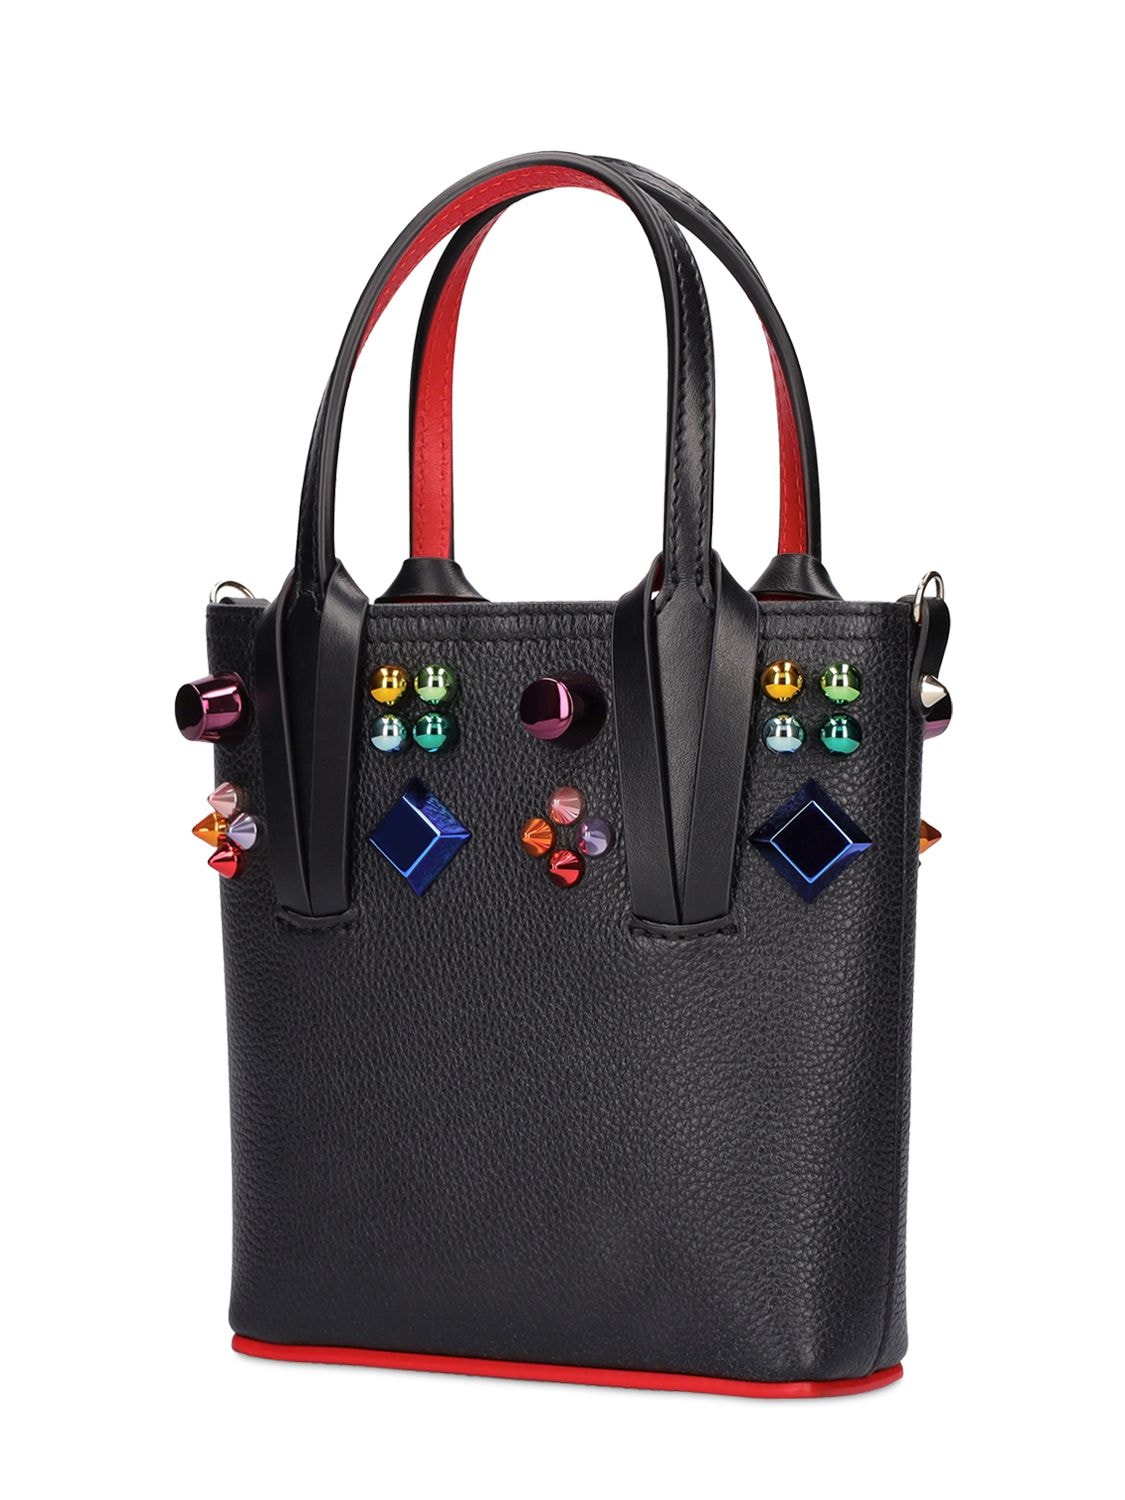 Christian Louboutin - Cabata Small Spike-Embellished Leather Tote Bag -  Womens - Black for Women